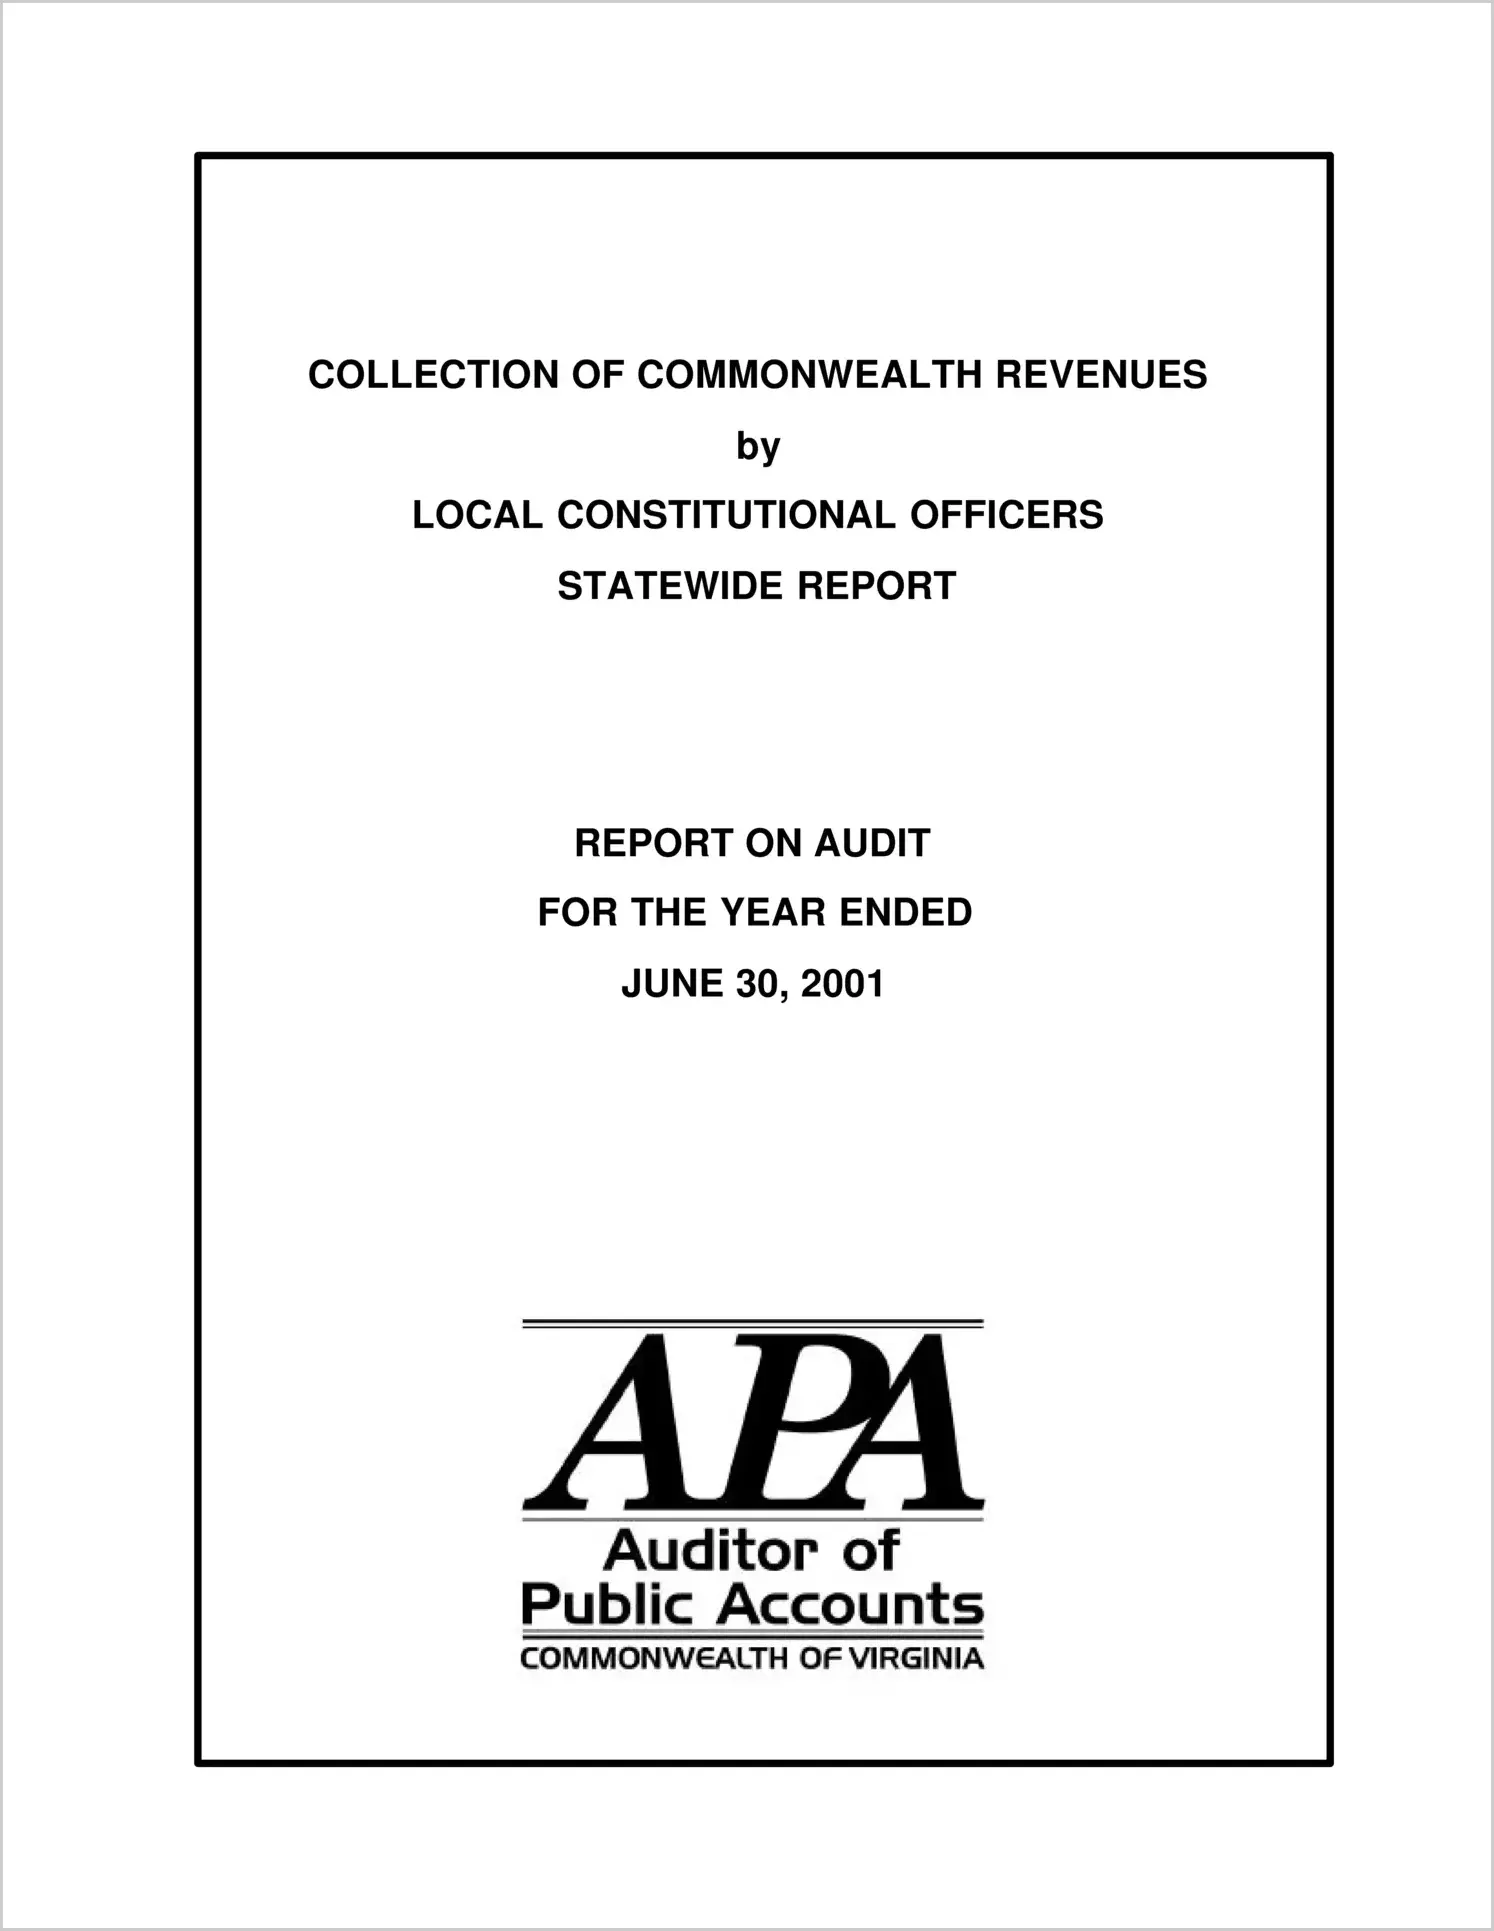 Collection of Commonwealth Revenues by Local Constitutional Officers Statewide Report for the year ended June 30, 2001